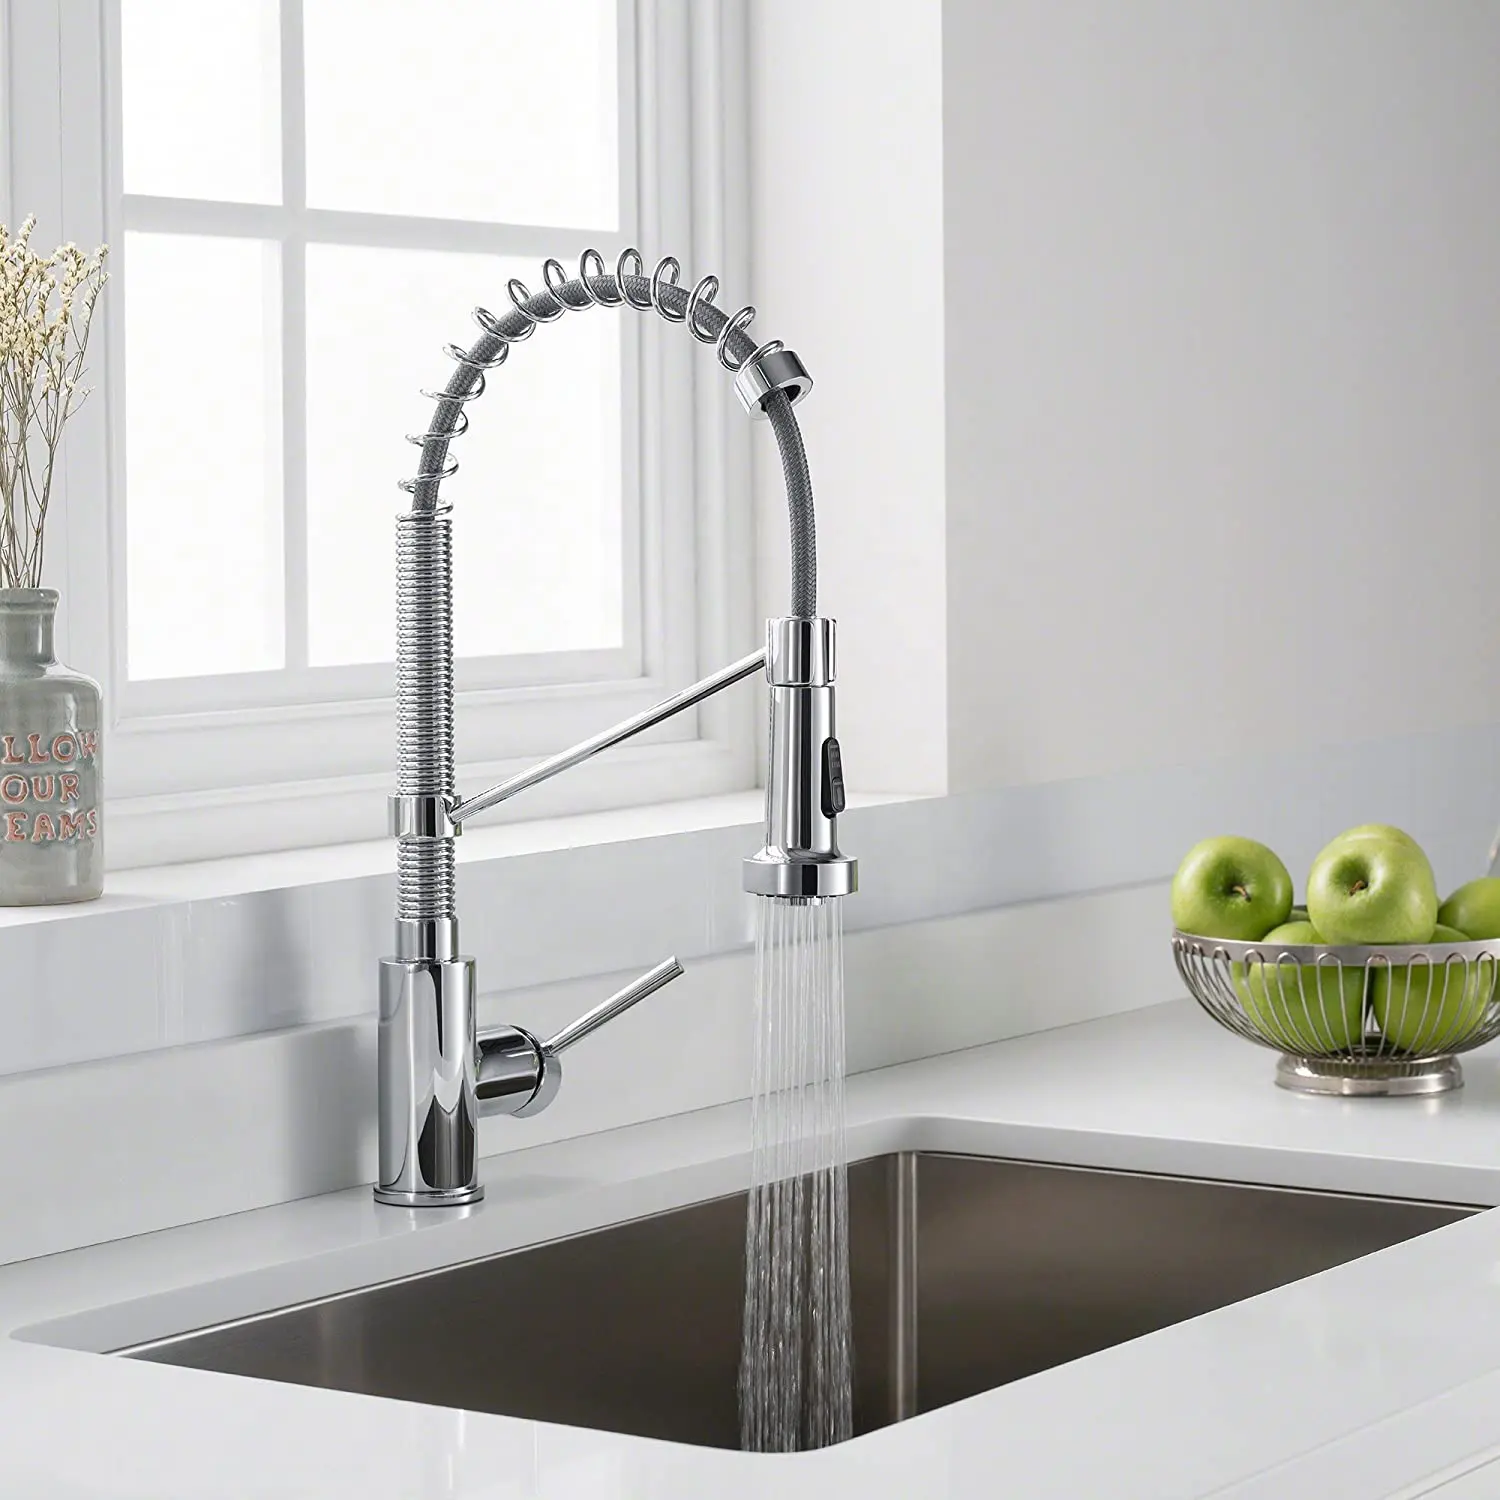 2023 Commercial Kitchen Faucet with Dual Function Pull-Down Sprayhead Chrome